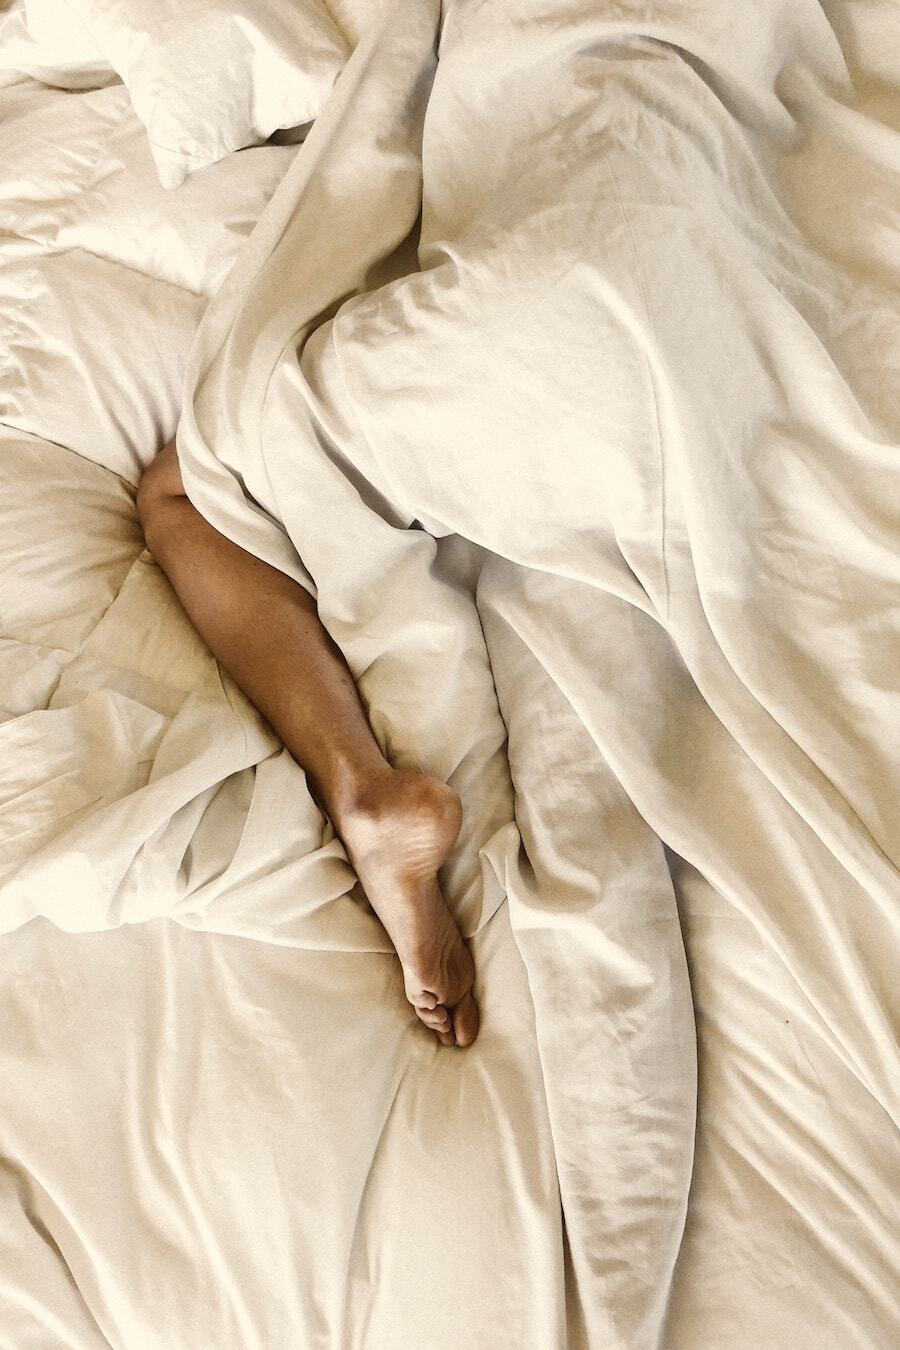 5 FACTS ABOUT SLEEP YOU PROBABLY DIDN’T KNOW